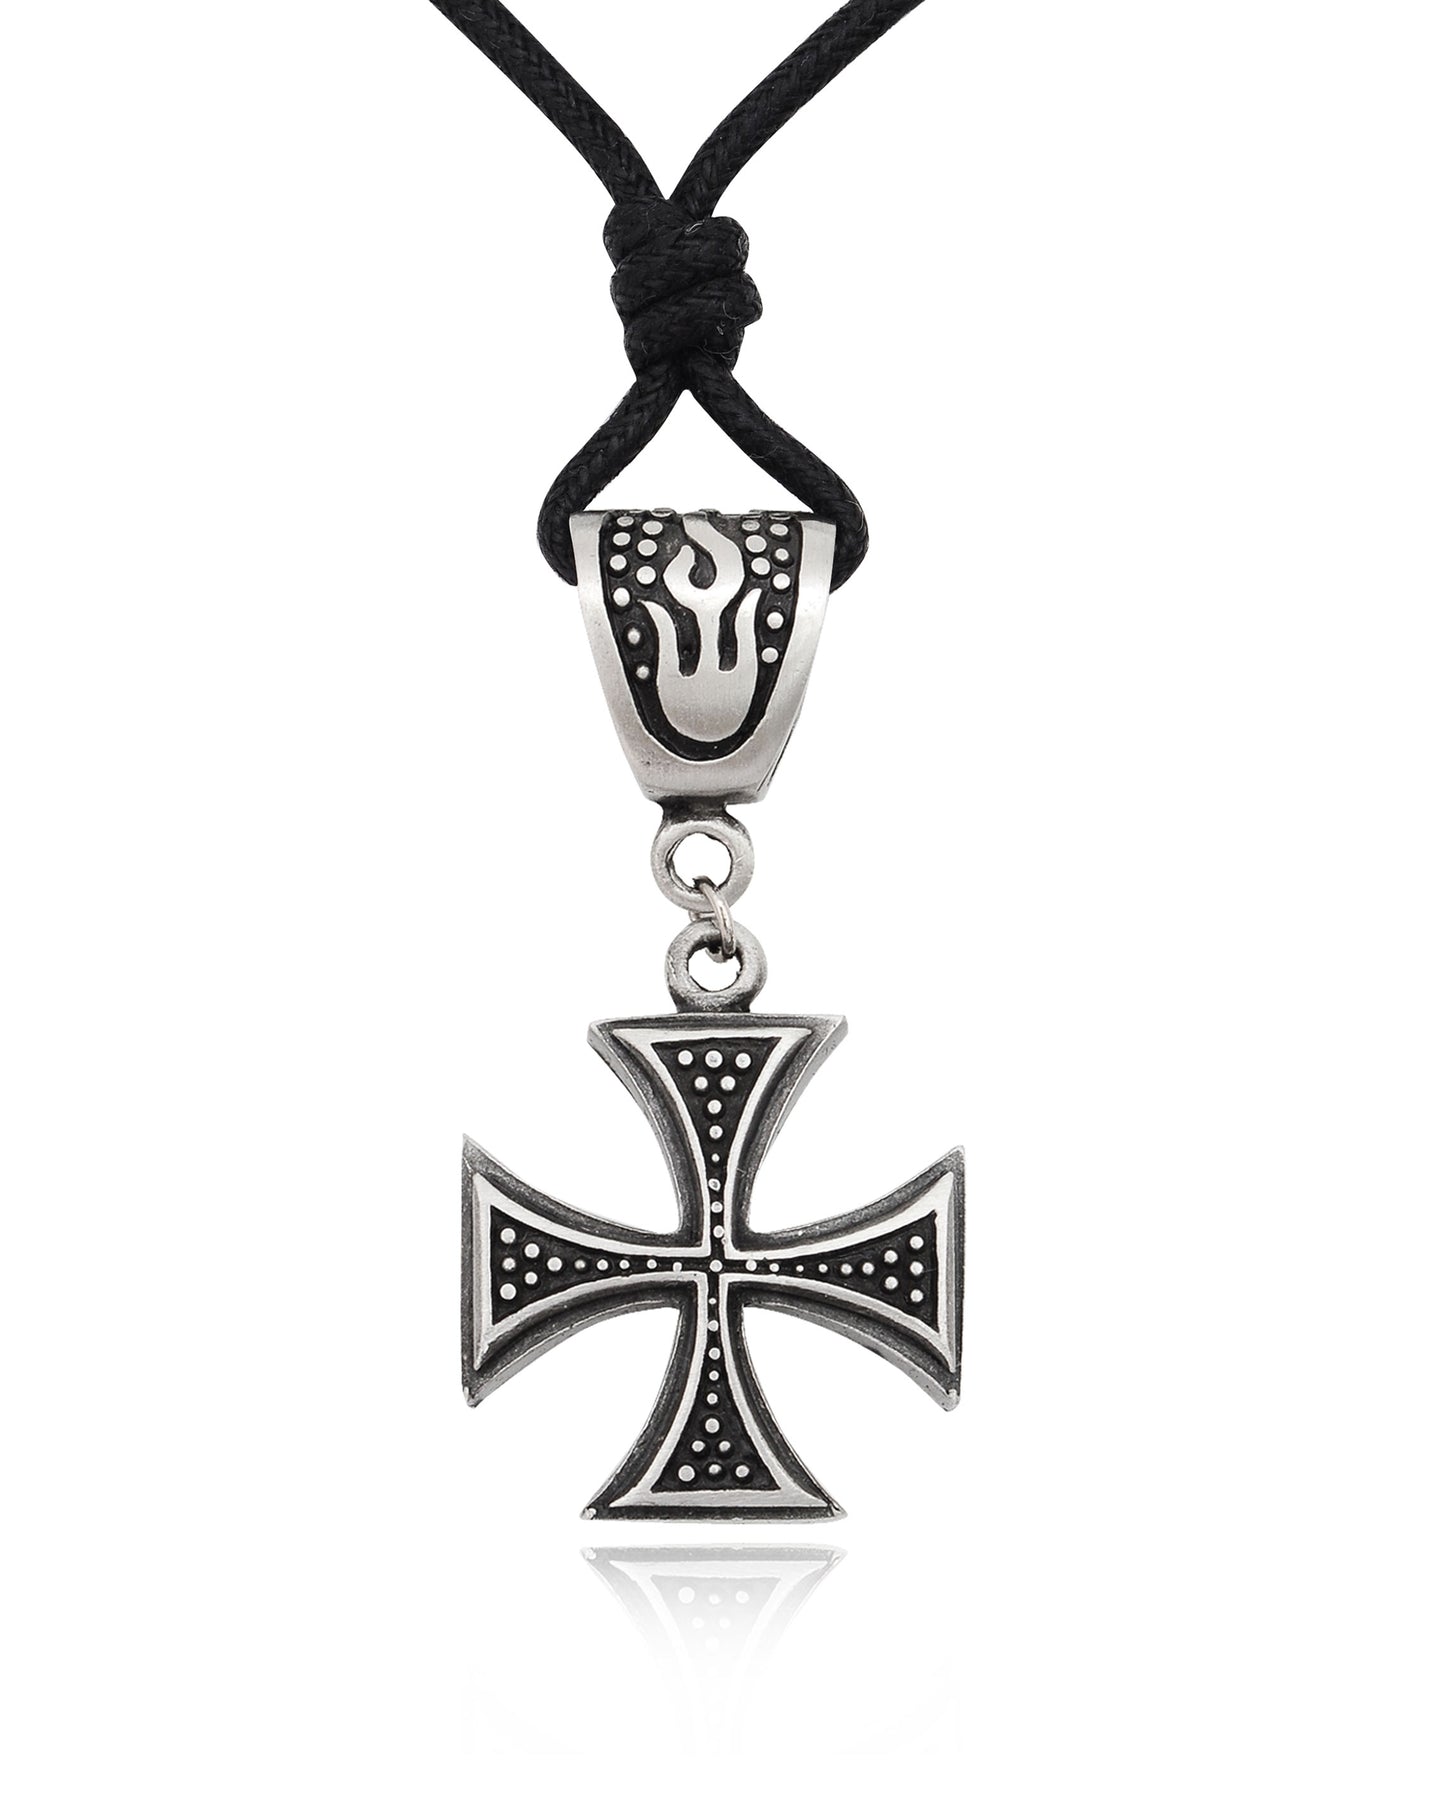 New Germanic Iron Cross Silver Pewter Charm Necklace Pendant Jewelry